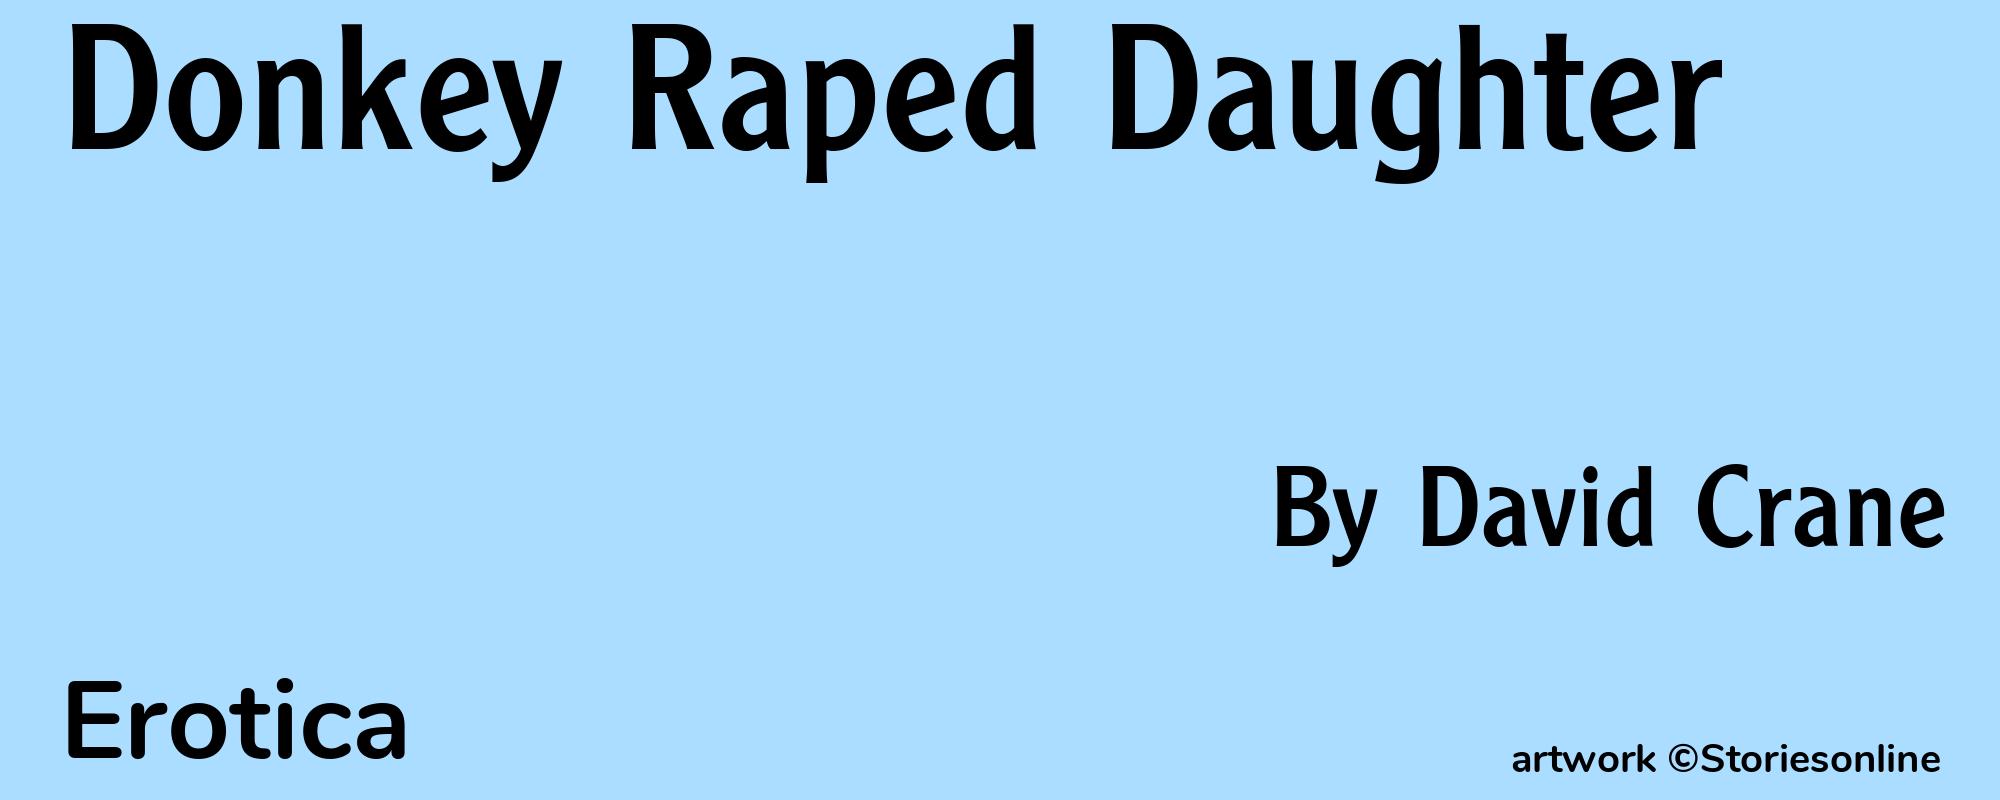 Donkey Raped Daughter - Cover